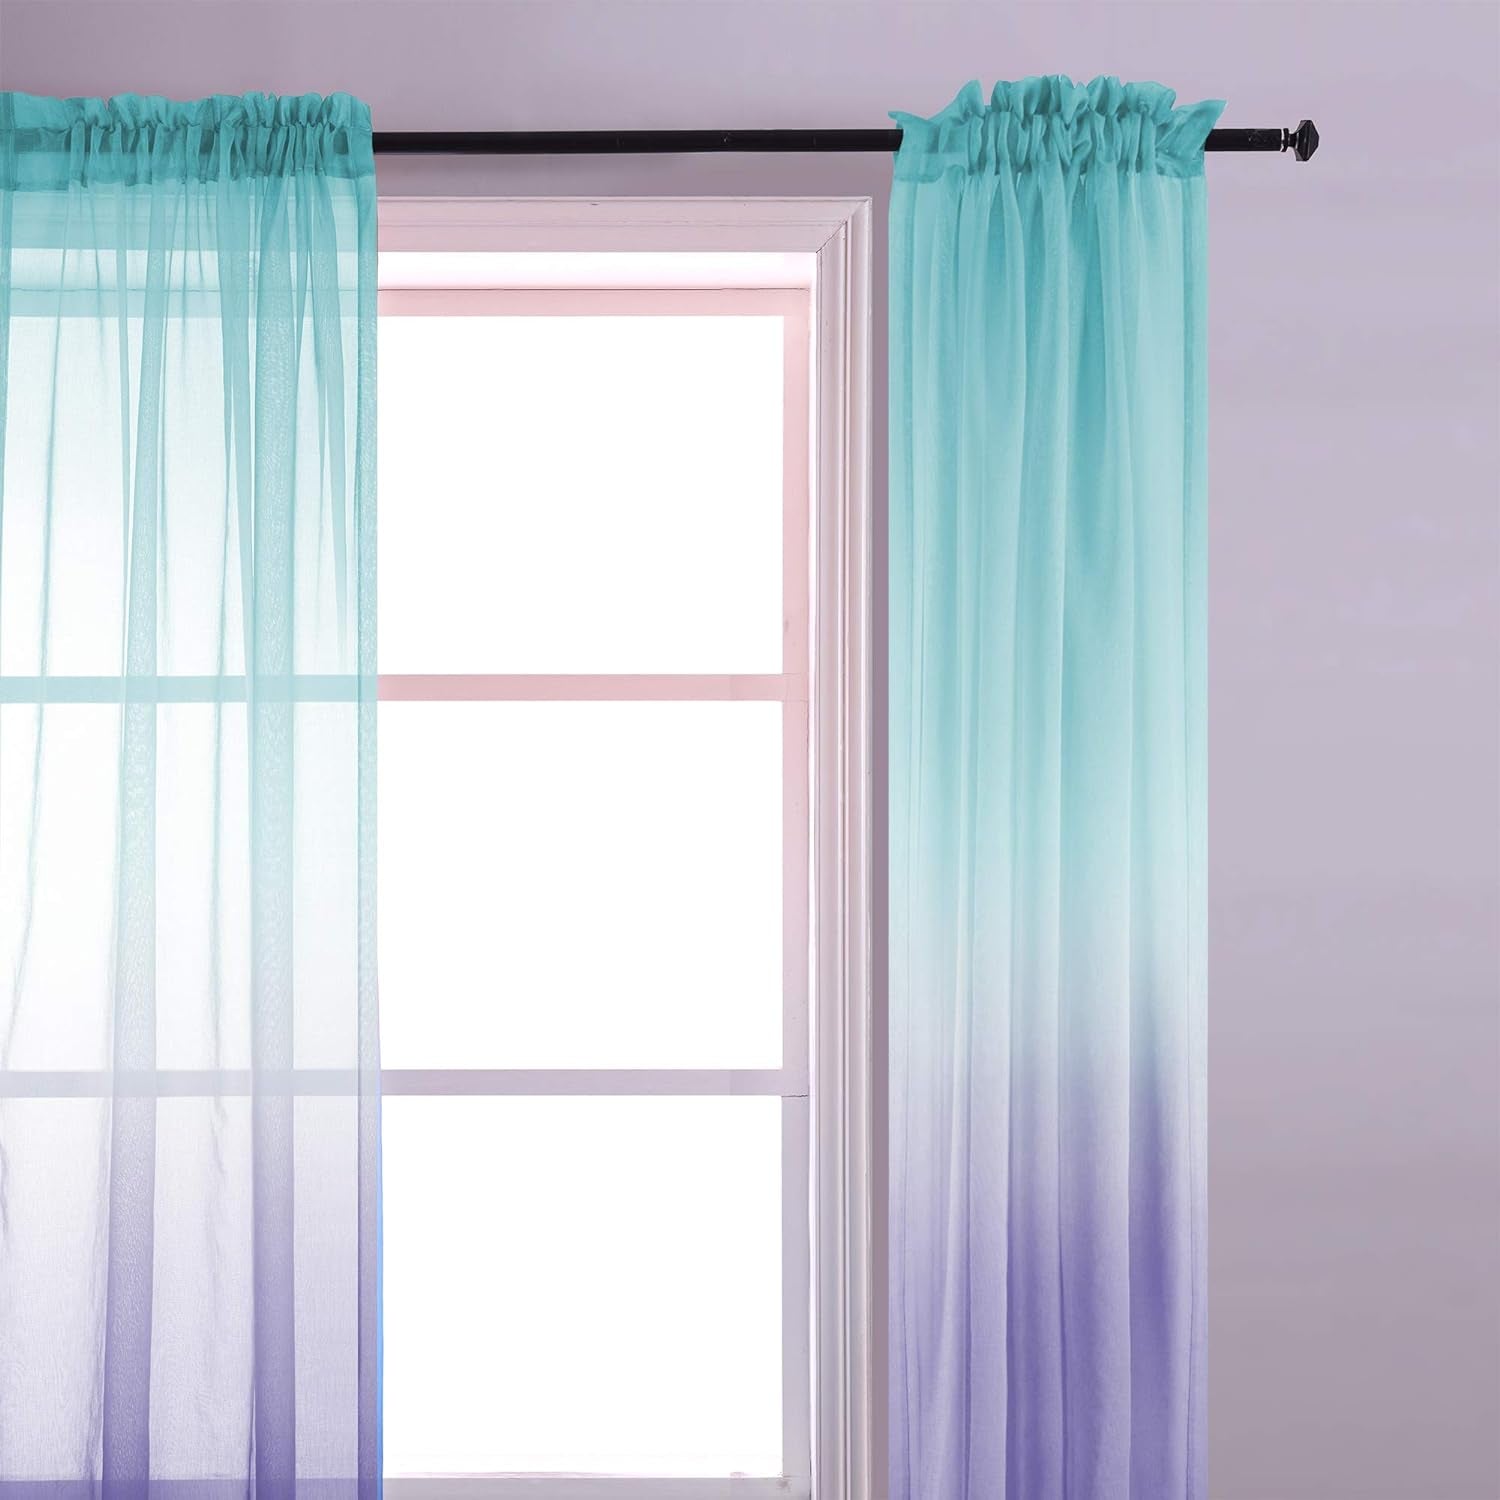 KOUFALL Kids Curtains 2 Panel Set for Bedroom Girls Room Mermaid Decor,Sheer Ombre Baby Curtains for Nursery,Purple and Teal,63 Inch Length  KOUFALL TEXTILE   